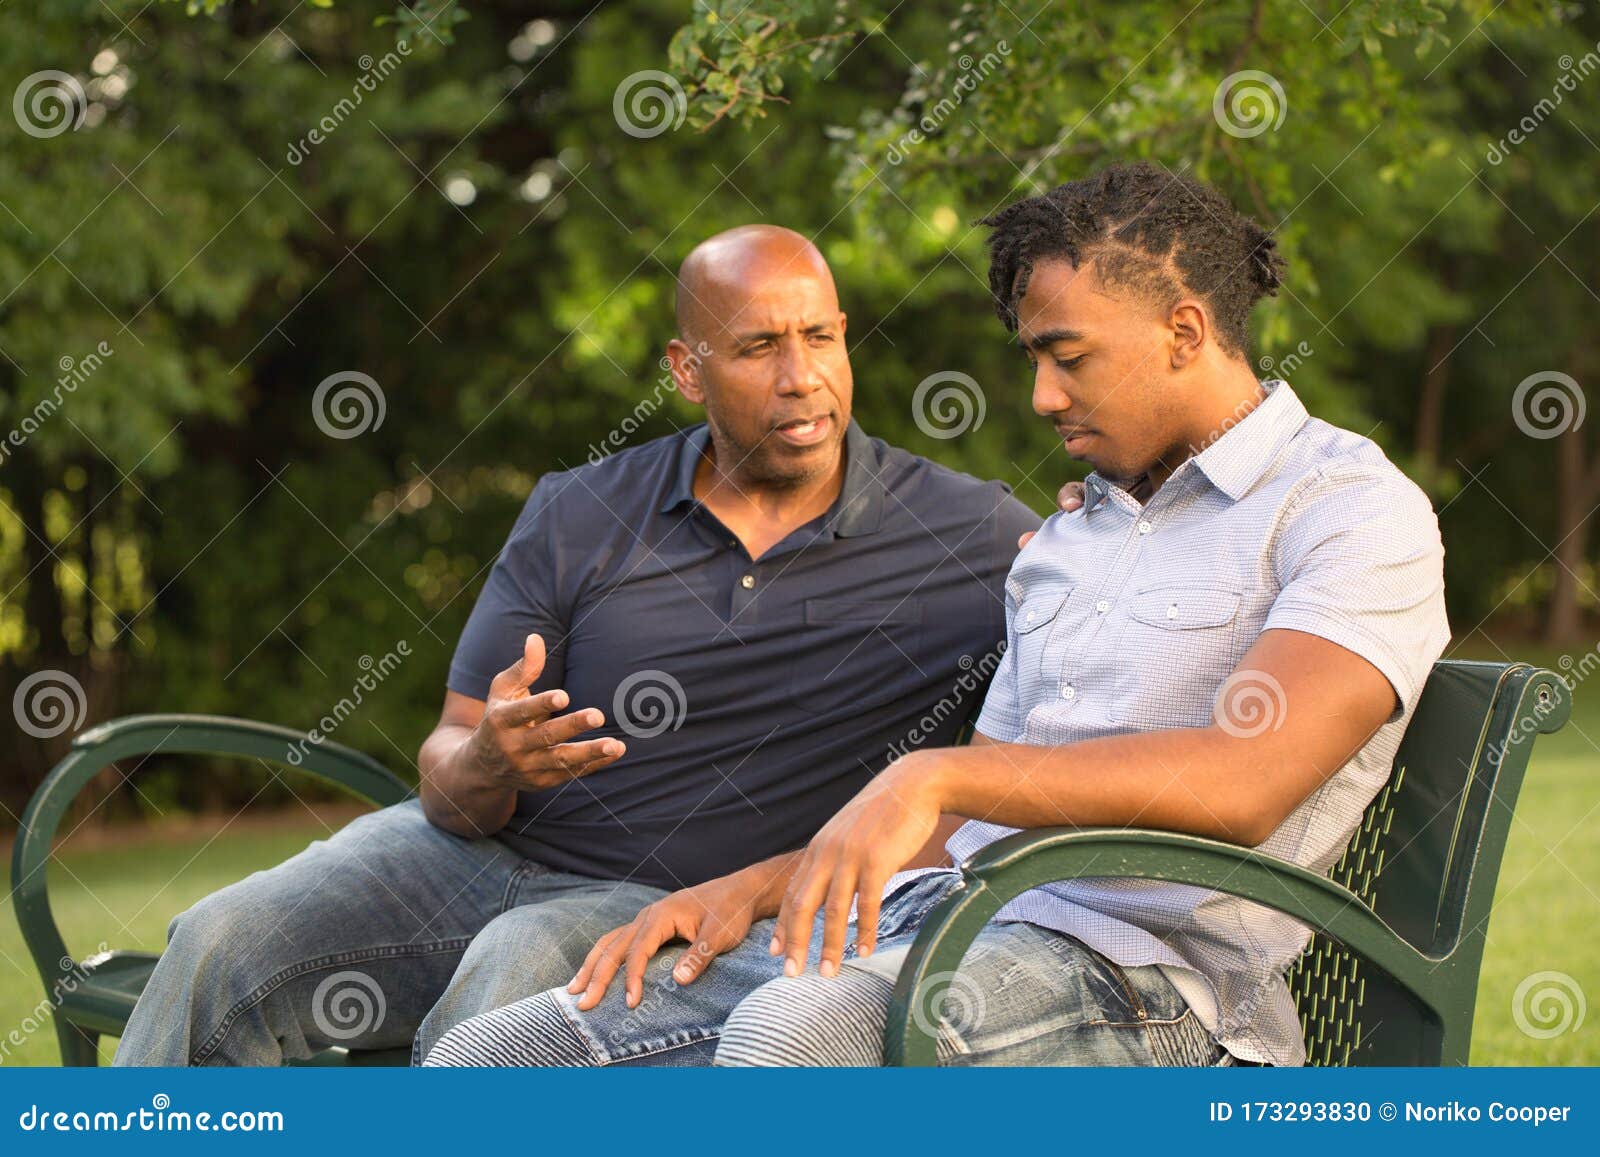 mature man mentoring and giving advice to a younger man.